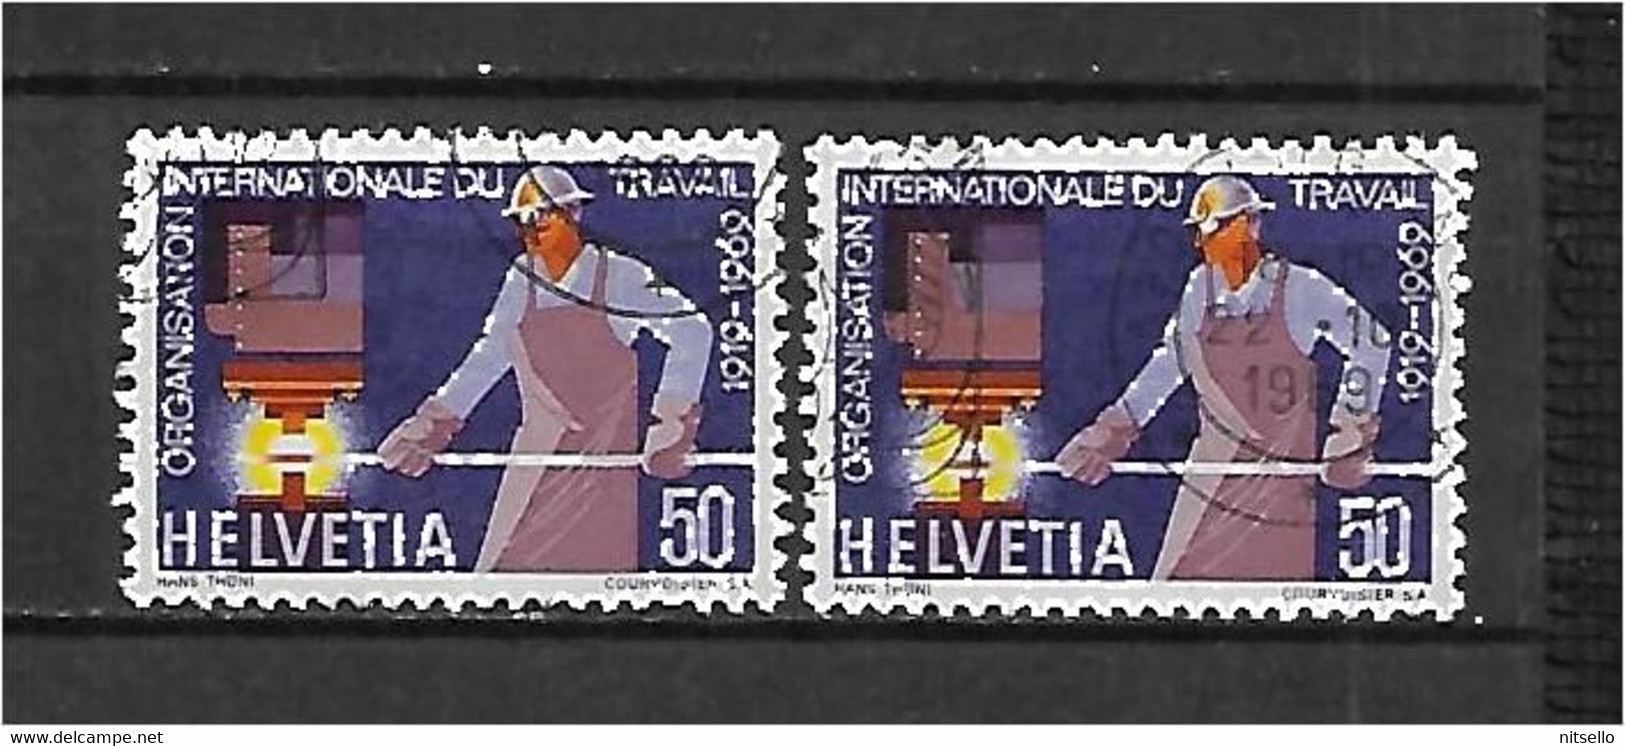 LOTE 1530  ///  SUIZA   YVERT Nº: 840  ¡¡¡ OFERTA - LIQUIDATION - JE LIQUIDE !!! - Used Stamps